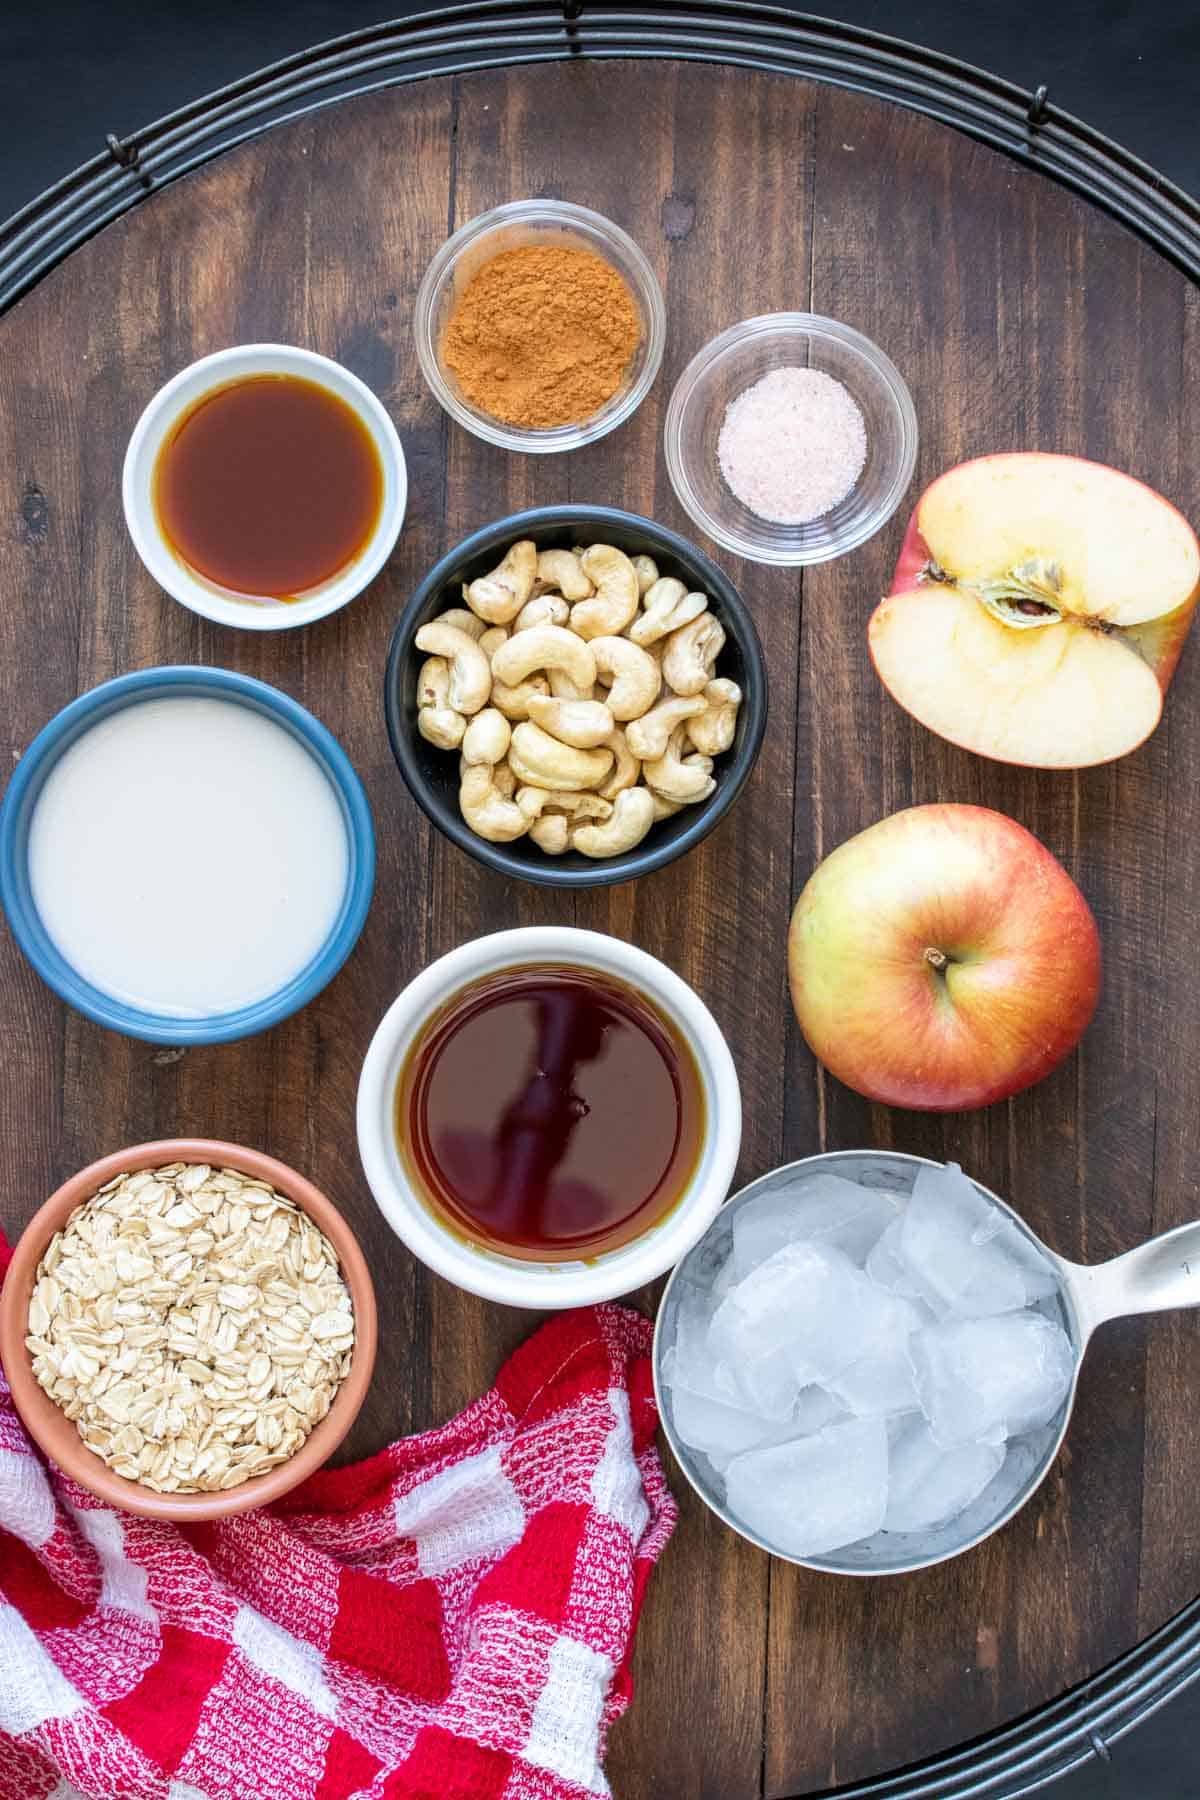 Ingredients to make a dairy free apple smoothie on a wooden surface with a red checked towel.